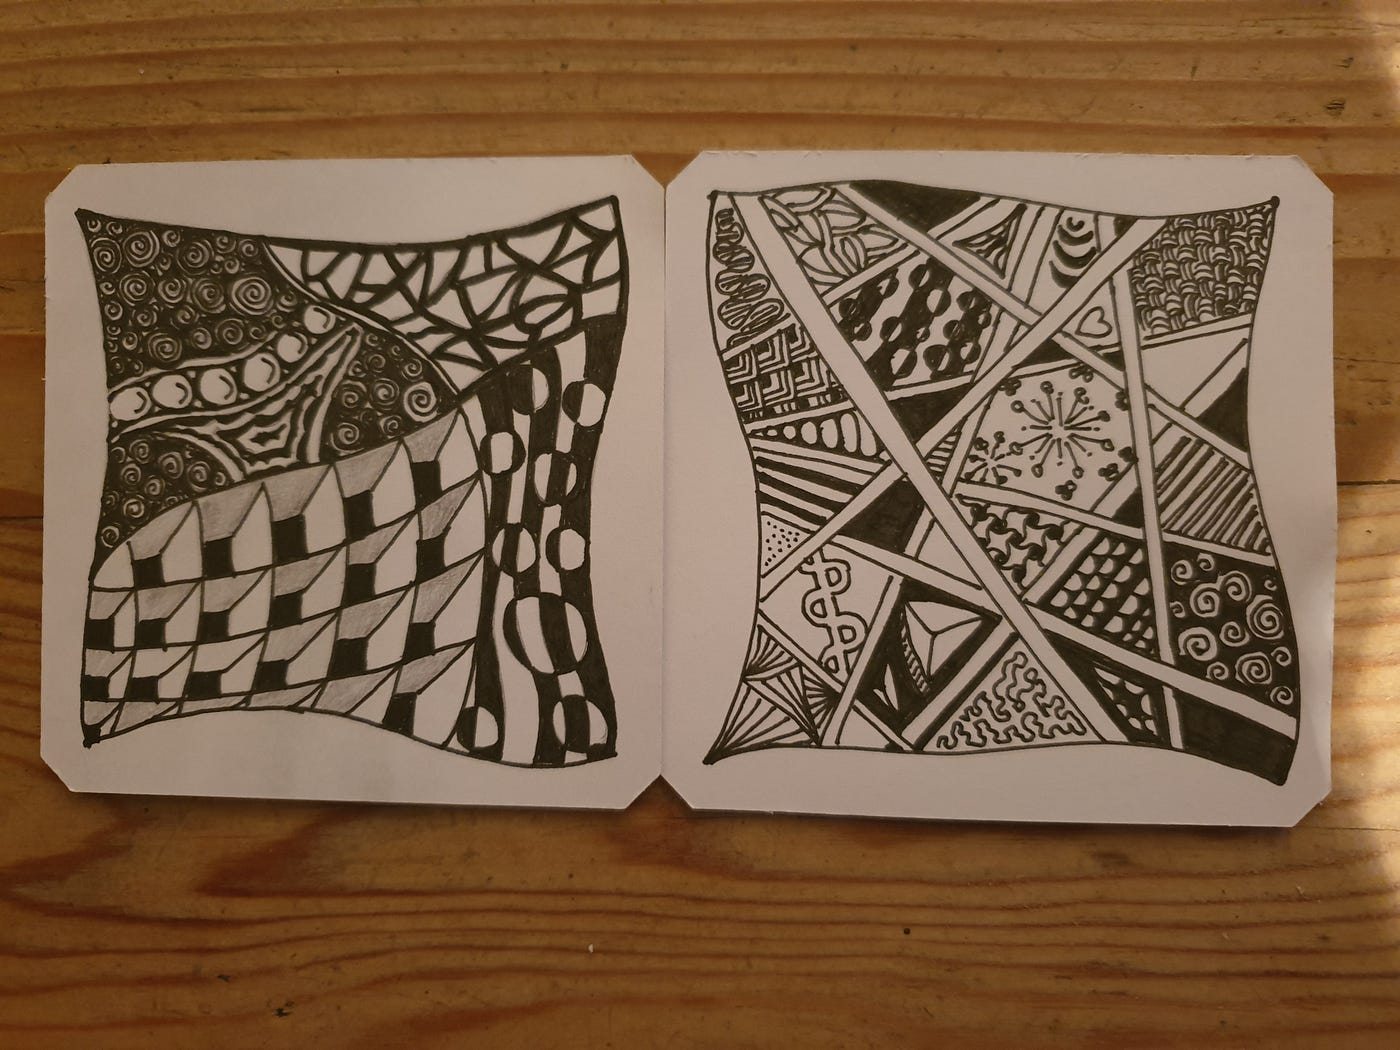 31 Days - 31 Tiles : Develop a Daily Zentangle Practice - Angel Whispers Art